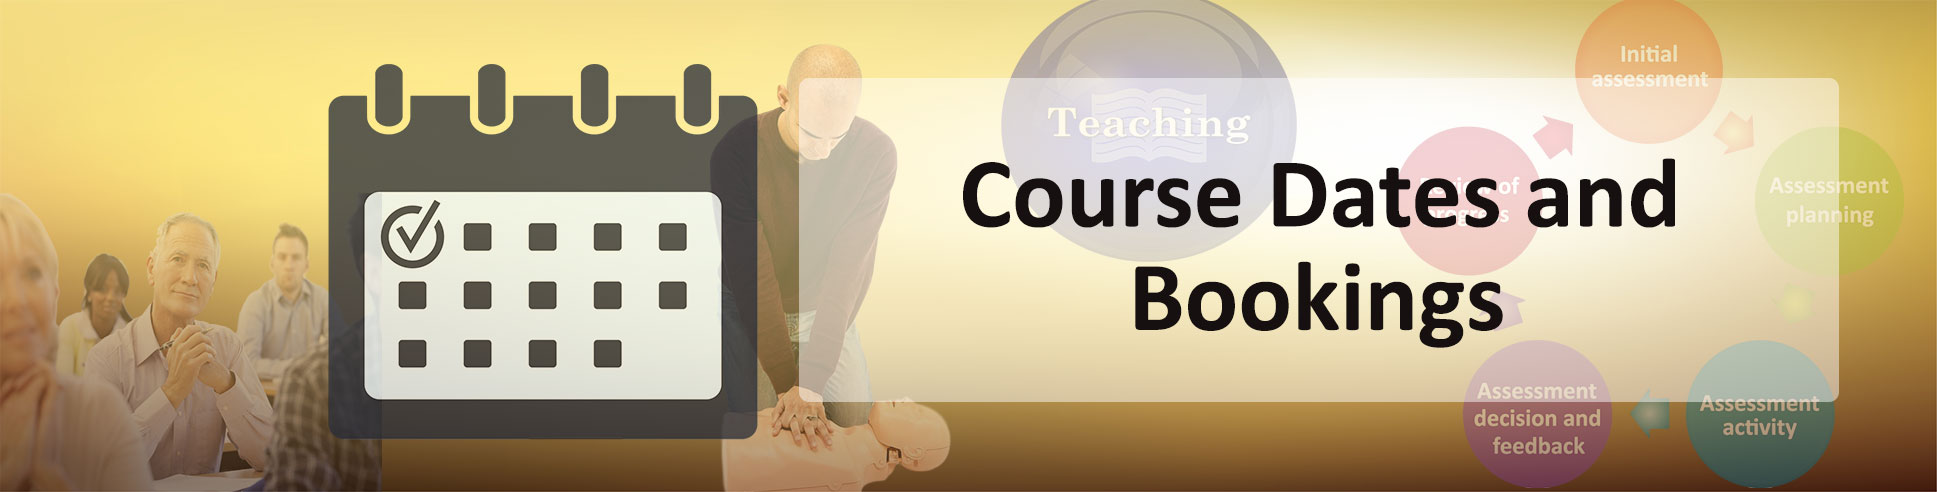 itg course dates and bookings